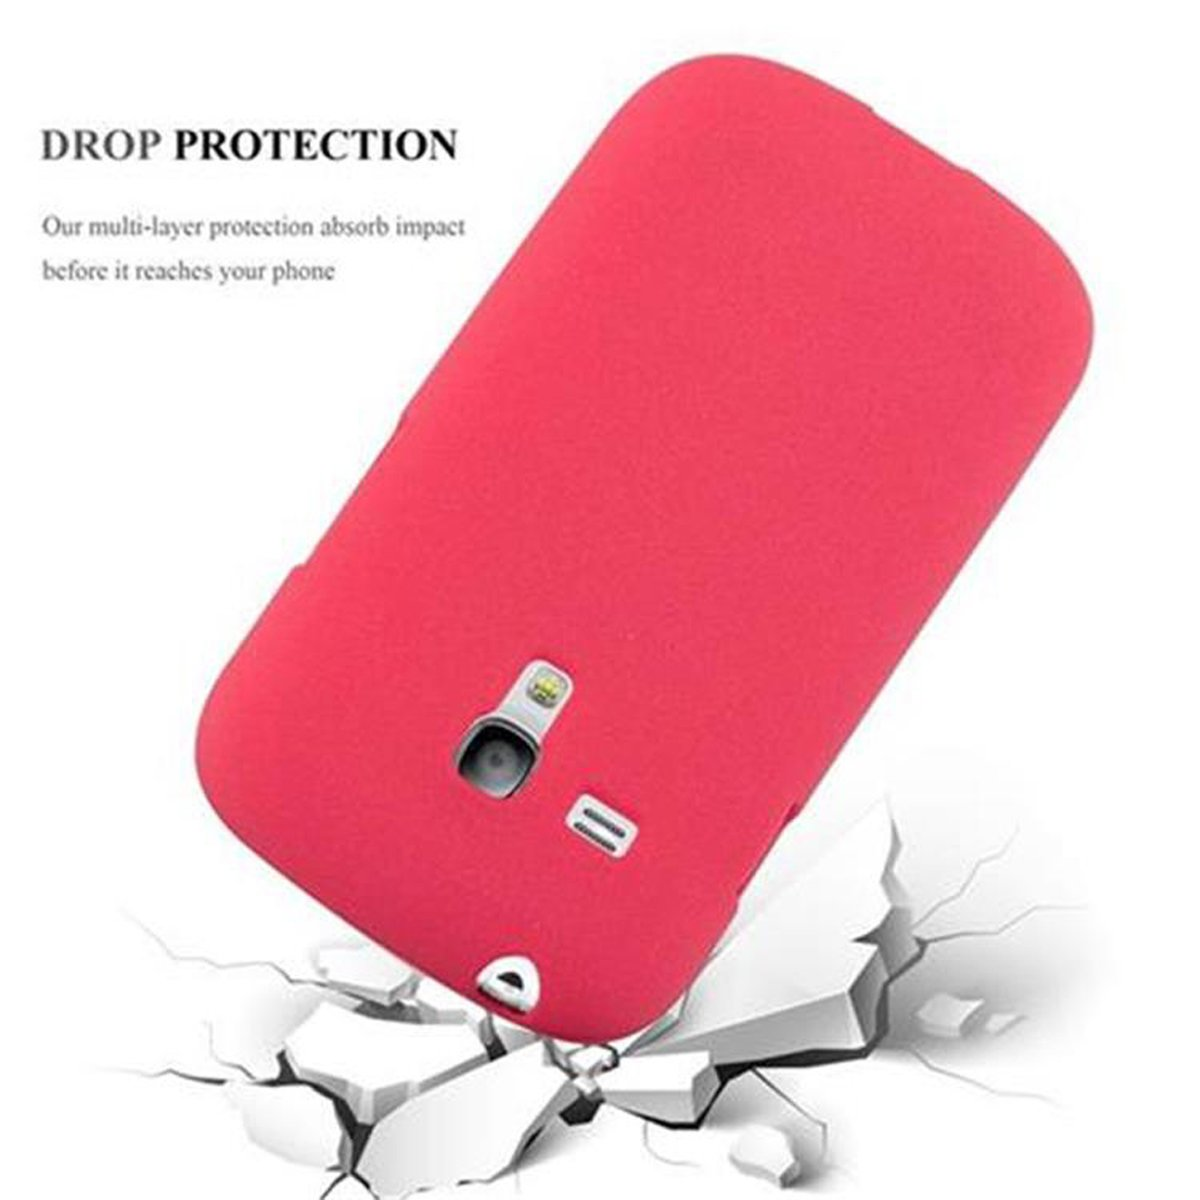 CADORABO TPU Galaxy FROST Backcover, MINI, S3 Samsung, Schutzhülle, Frosted ROT